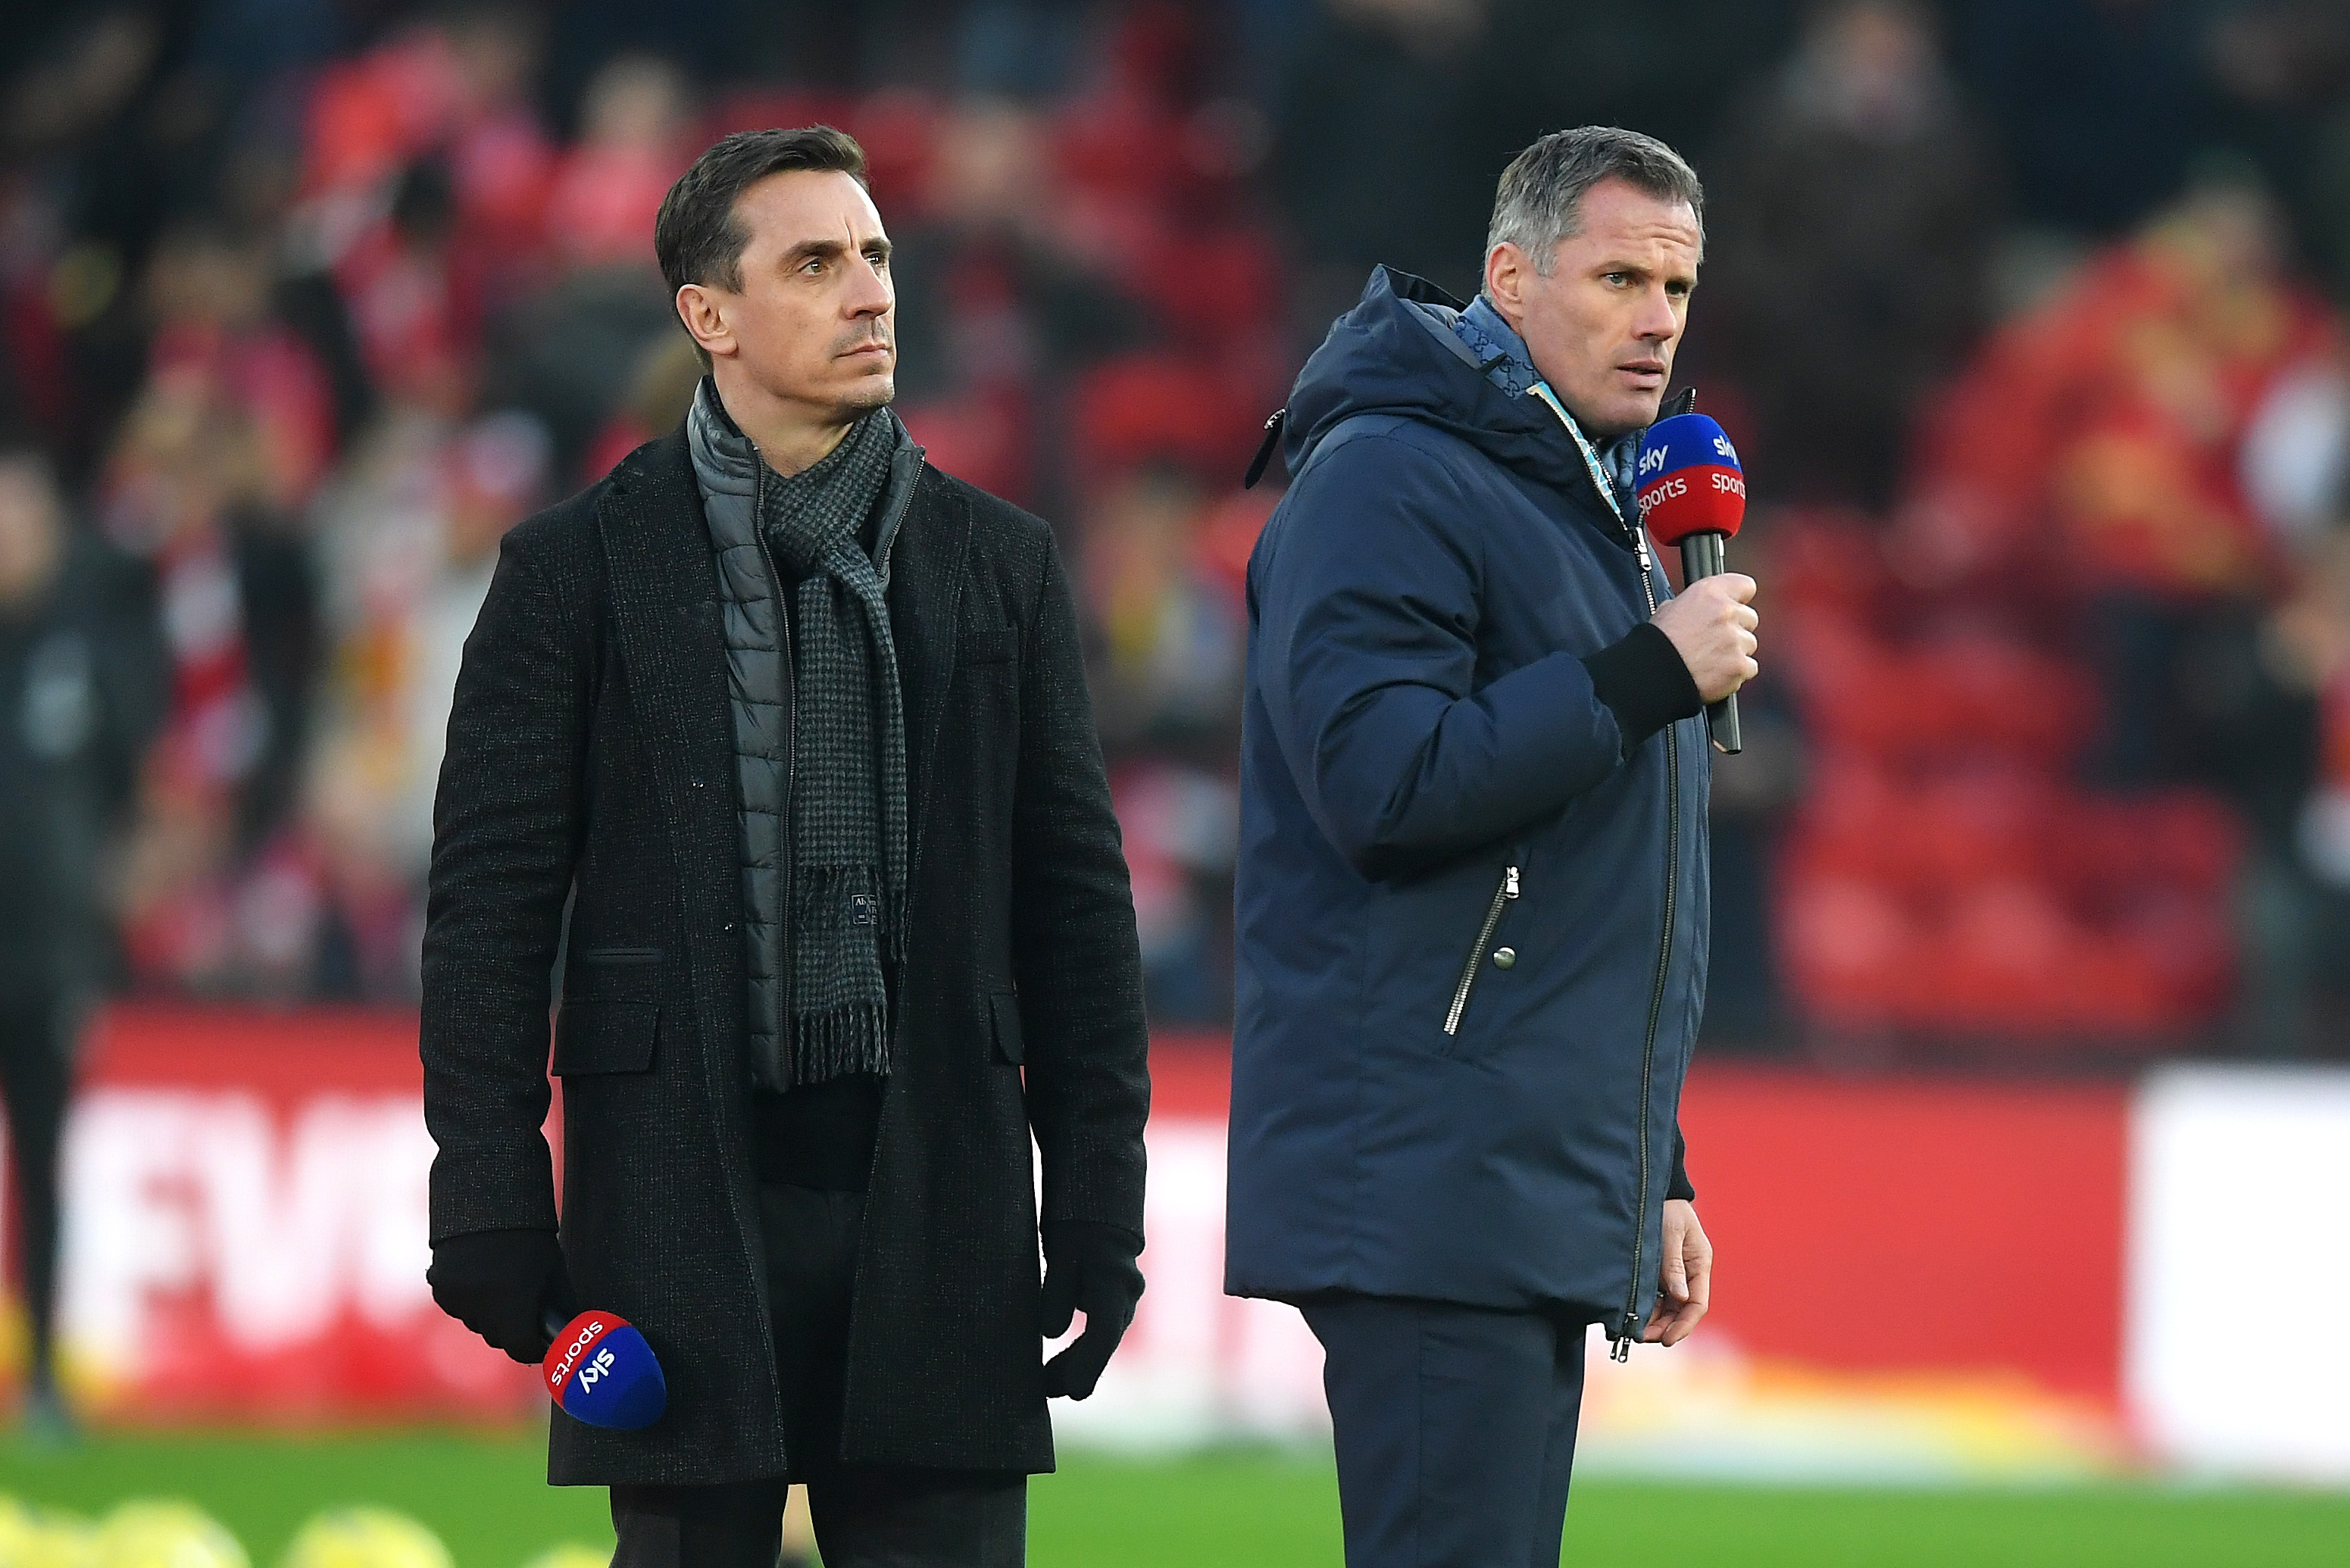 Jamie Carragher and Gary Neville involved in feisty social media spat regarding Cristiano Ronaldo’s Manchester United future